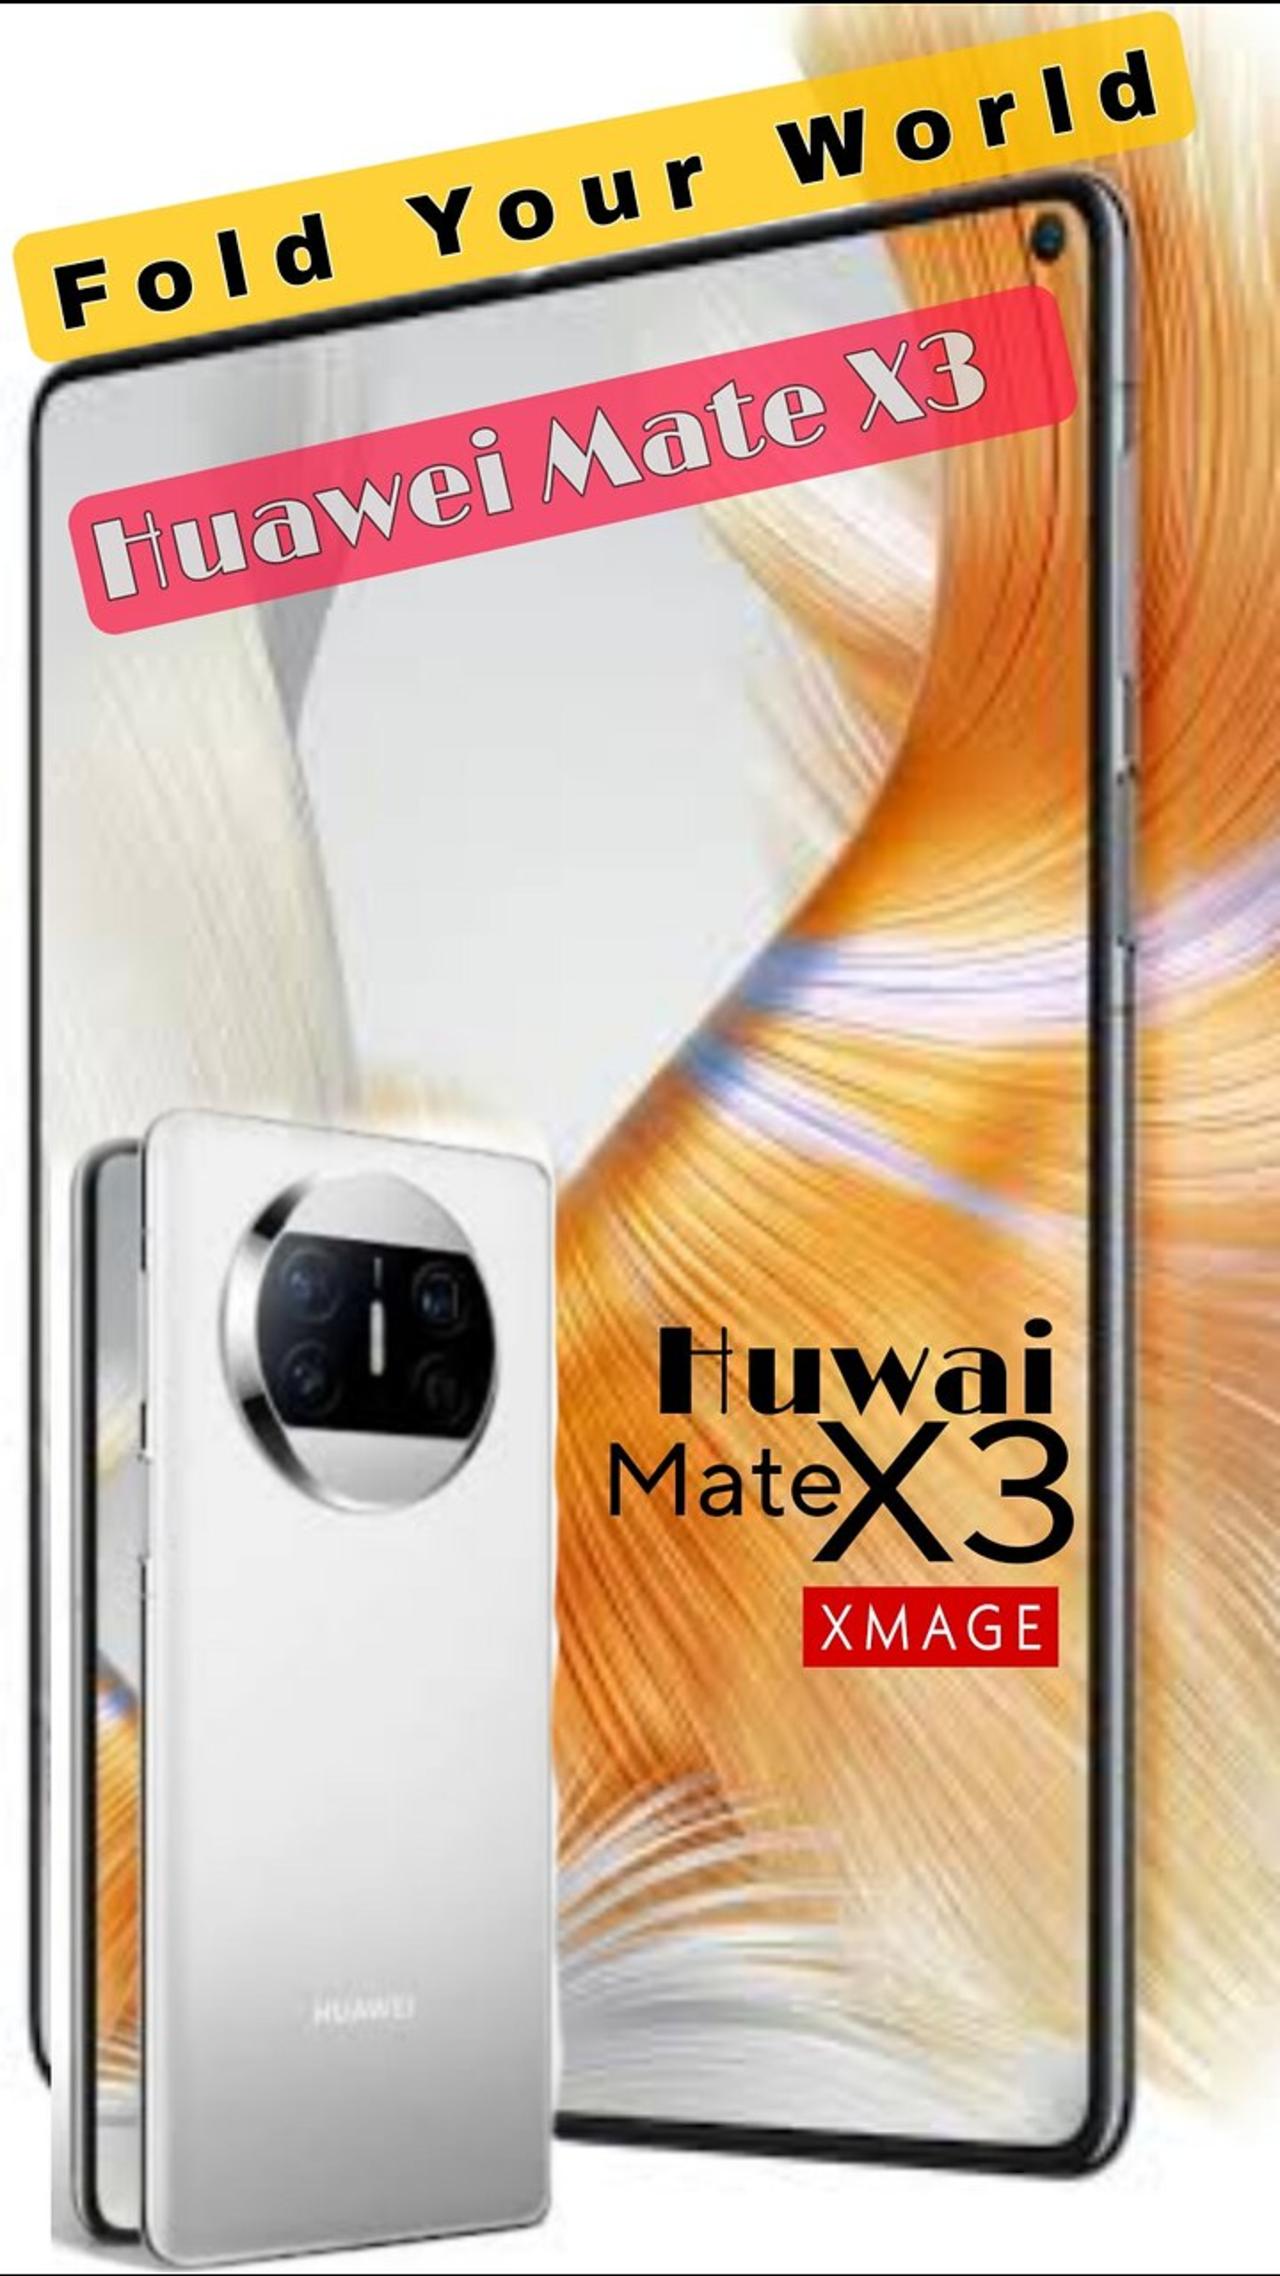 Warning! This Phone Will Change Your Life - Huawei Mate X3 Review #shorts 🔥💥